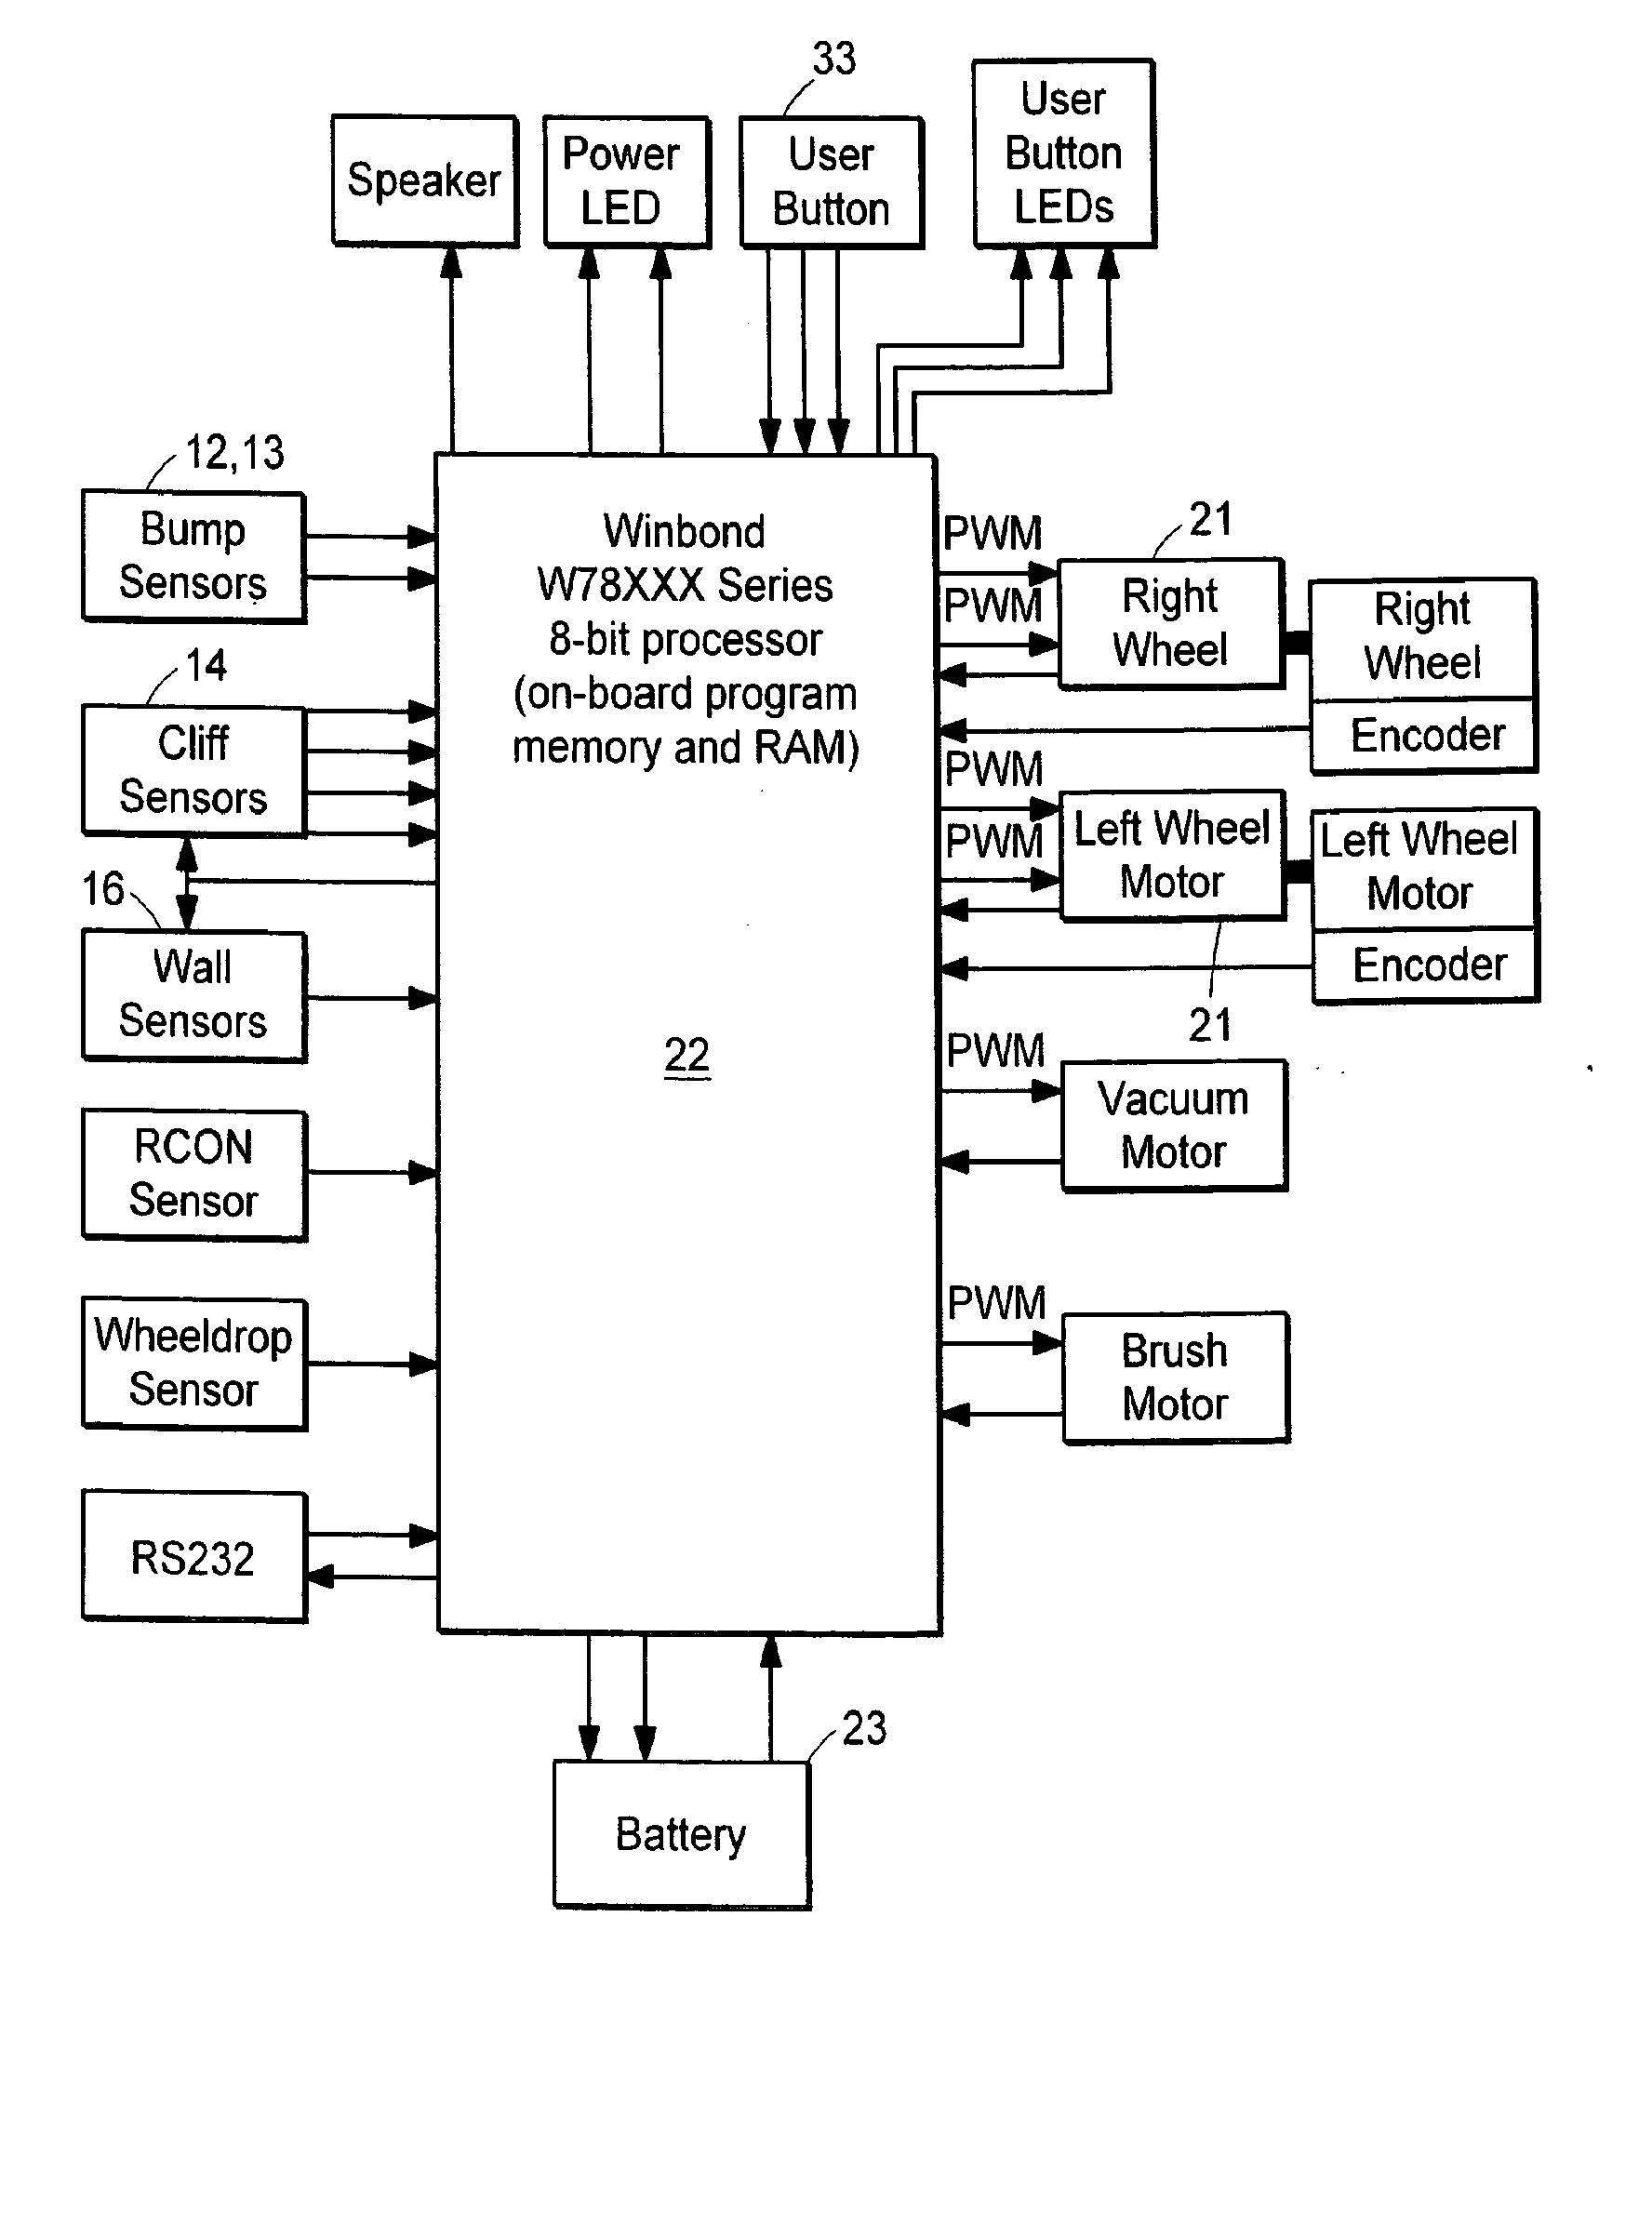 Method and System for Multi-Mode Coverage for an Autonomous Robot